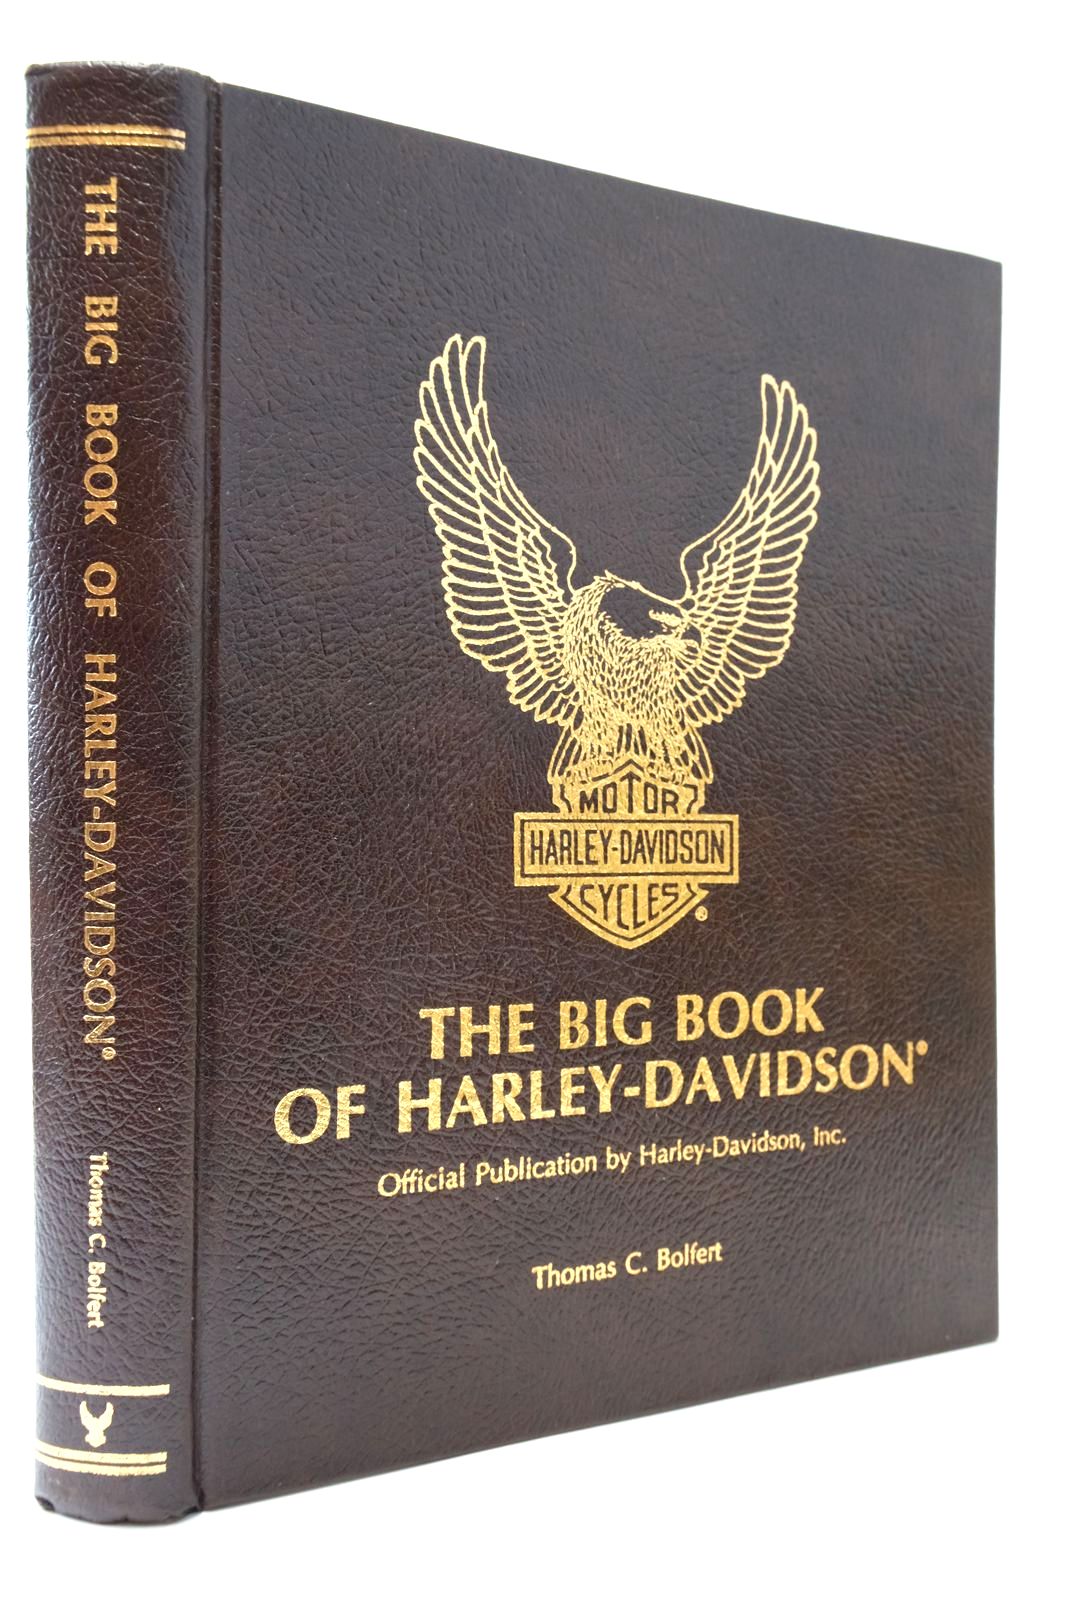 Photo of THE BIG BOOK OF HARLEY-DAVIDSON written by Bolfert, Thomas C. published by Harley Davidson, Inc (STOCK CODE: 2133305)  for sale by Stella & Rose's Books